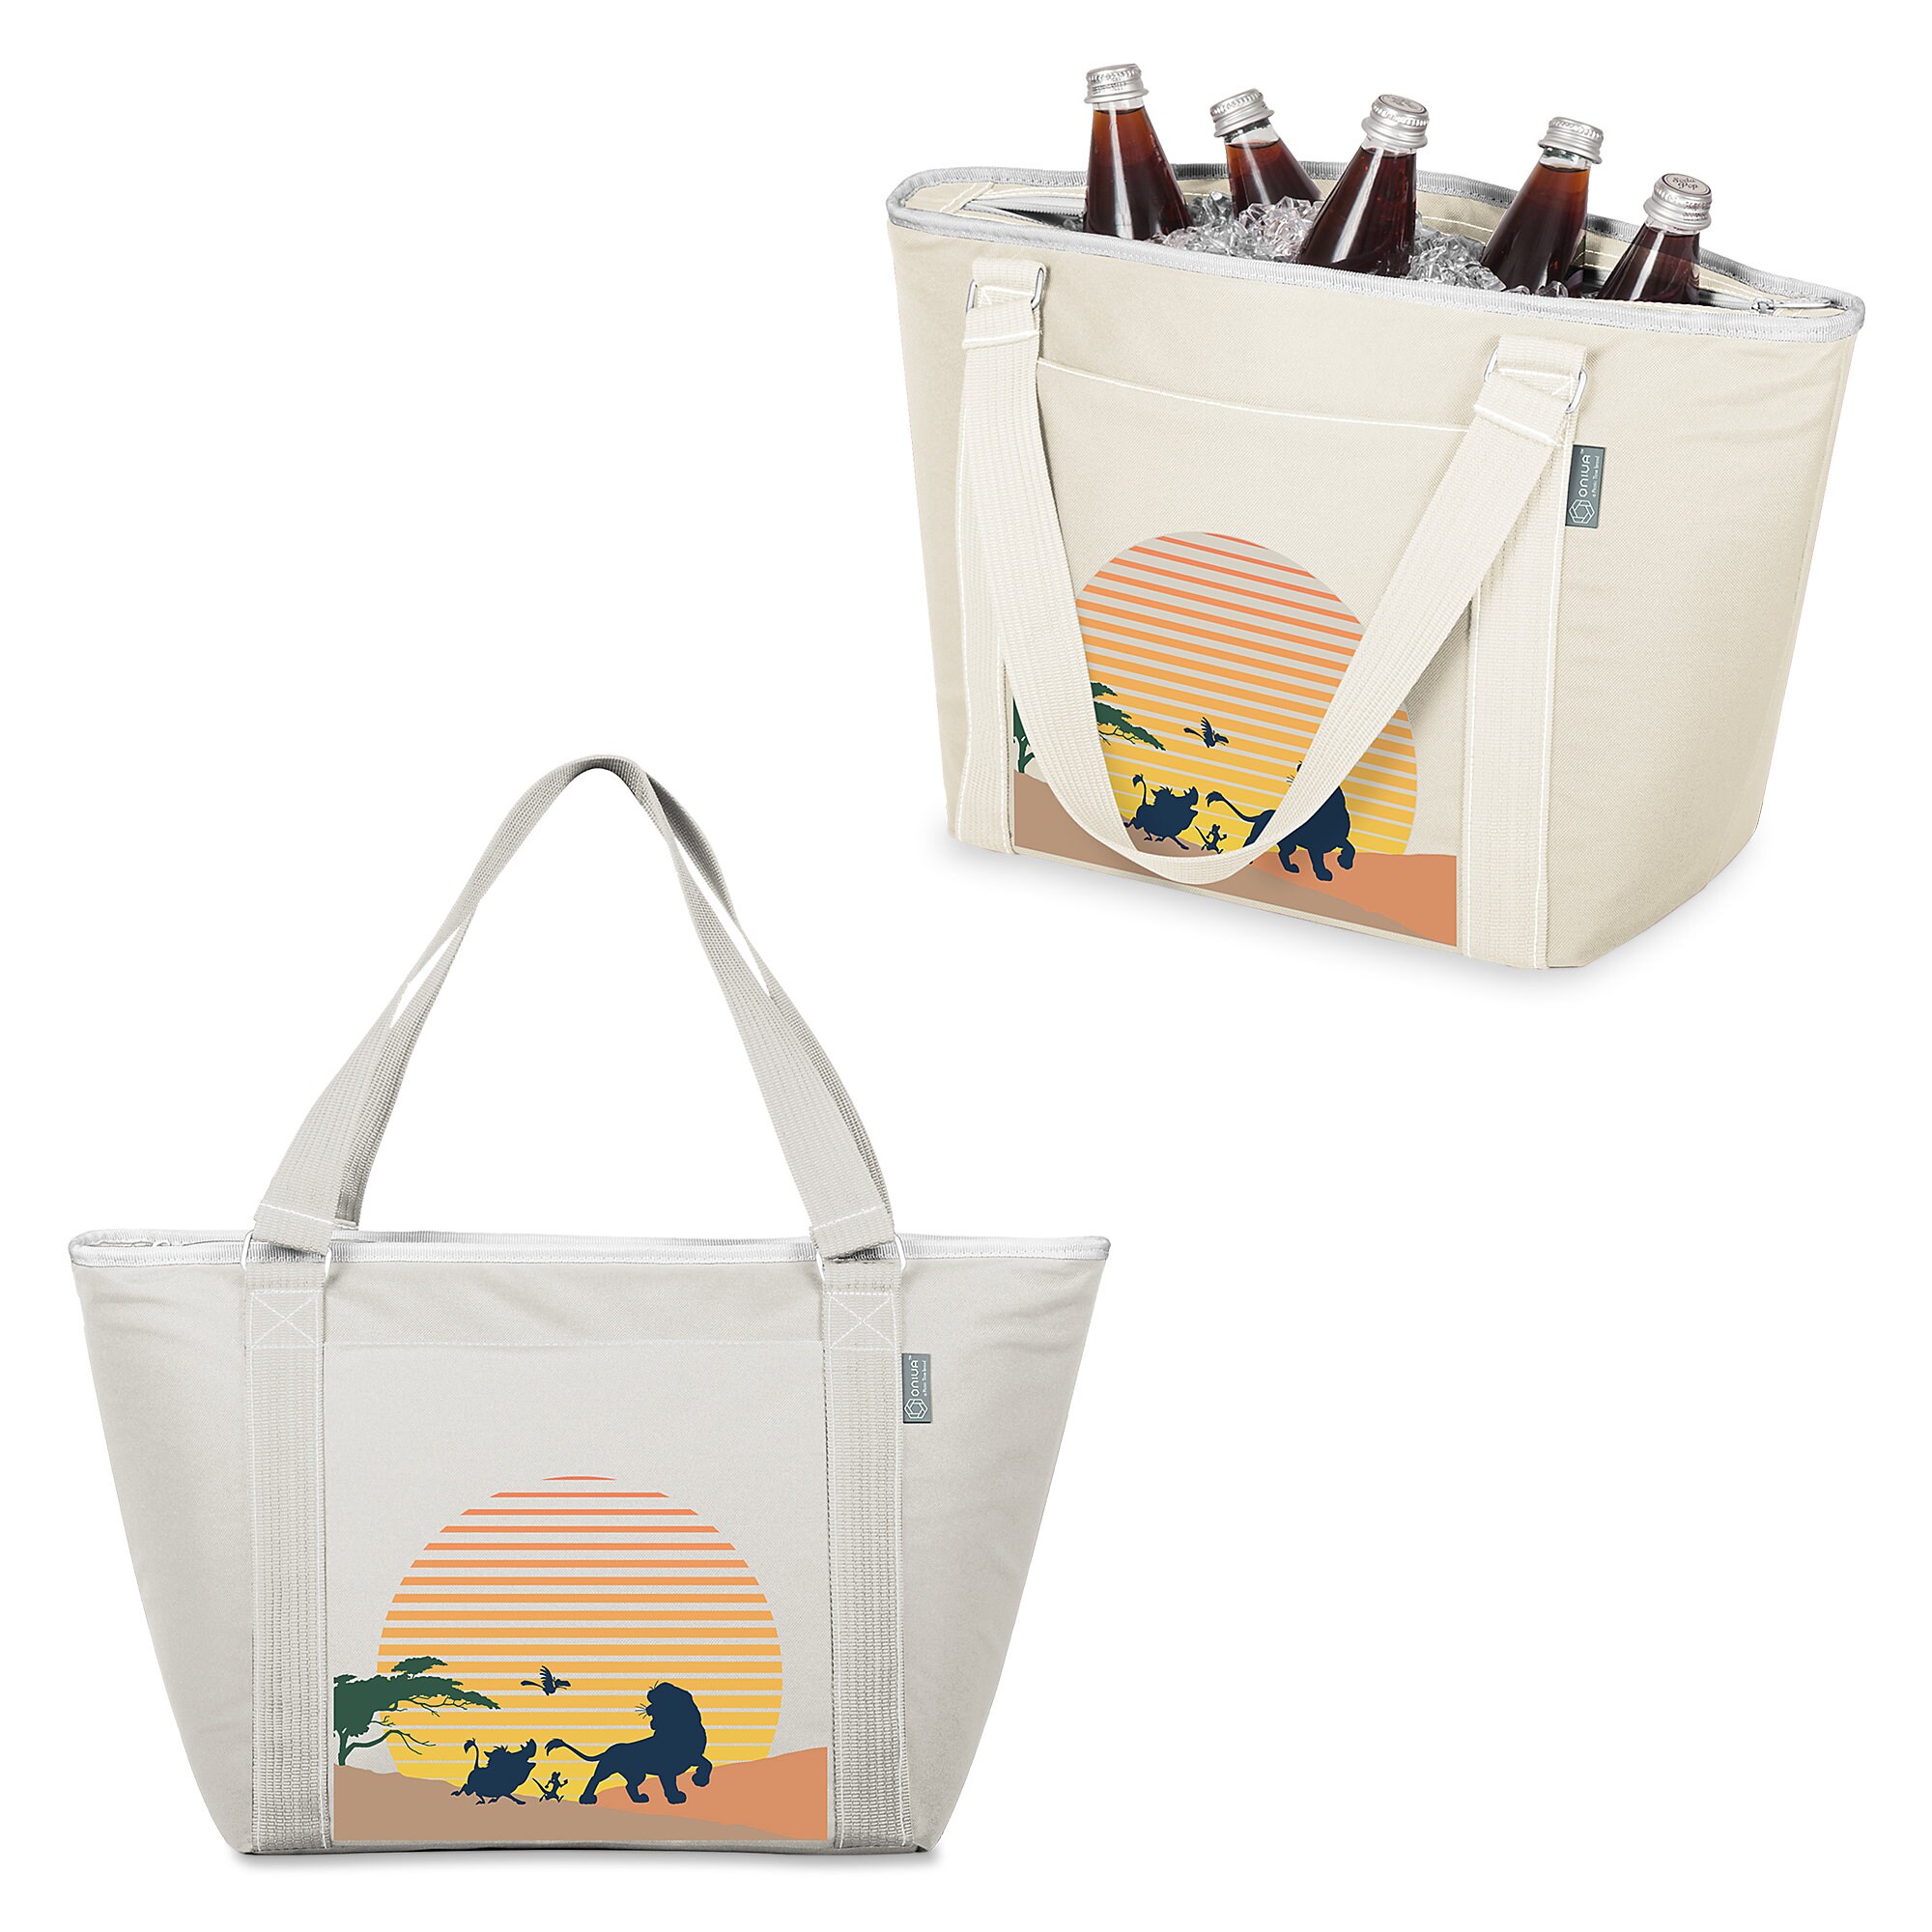 The Lion King Cooler Tote